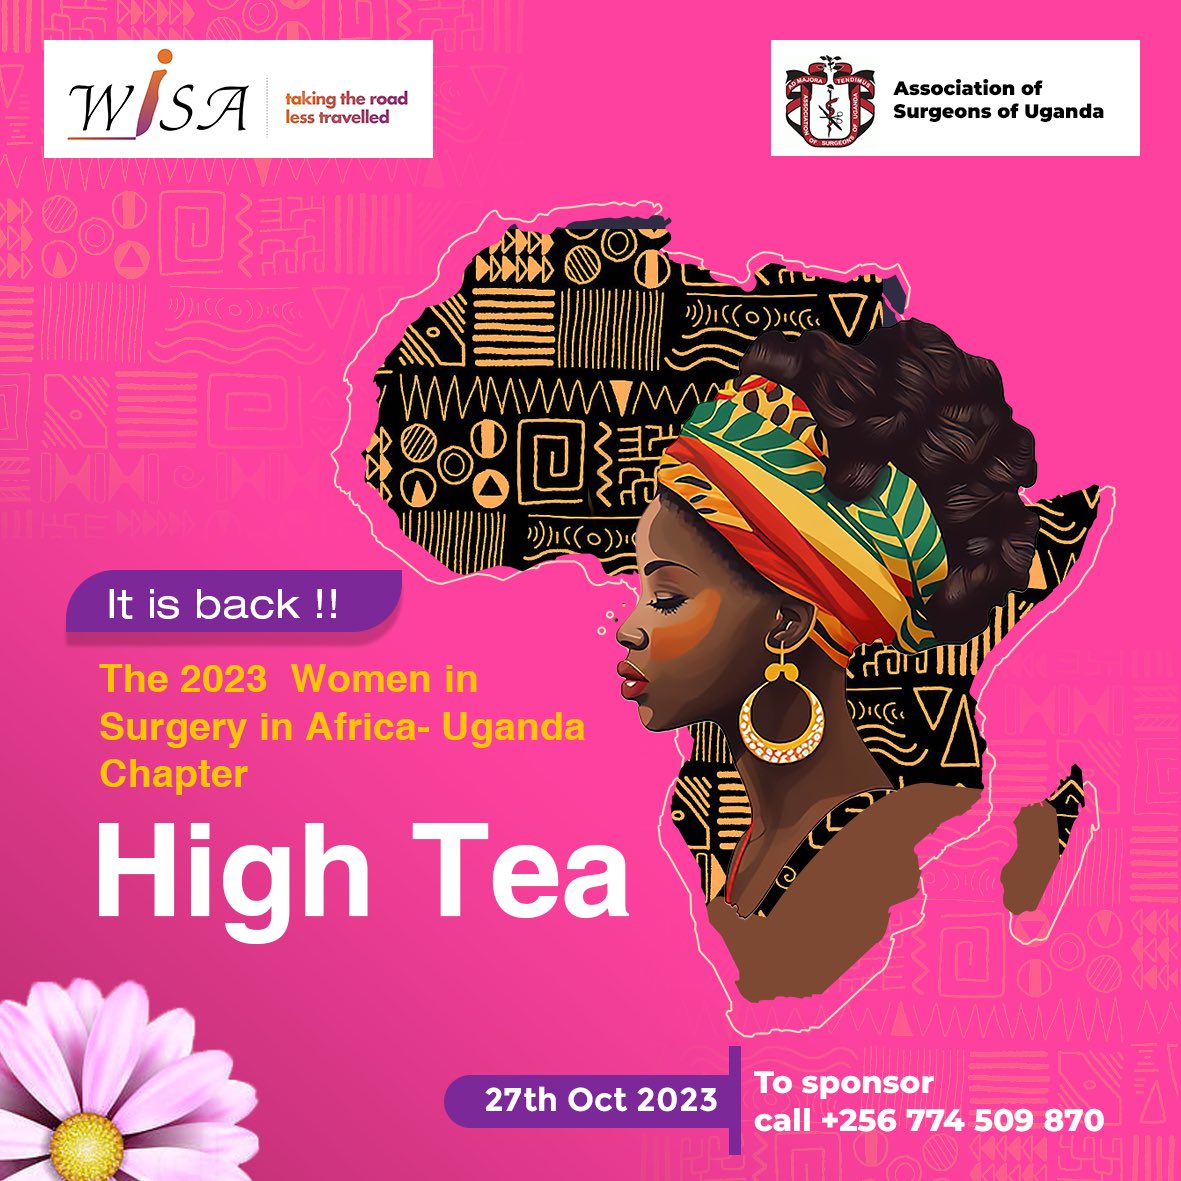 It’s back! It is the highly anticipated “Women in Surgery in Africa - Uganda, High Tea.” Come and connect with inspirational Women leaders in Surgery and also participate in incredible discussions. Will you join us?